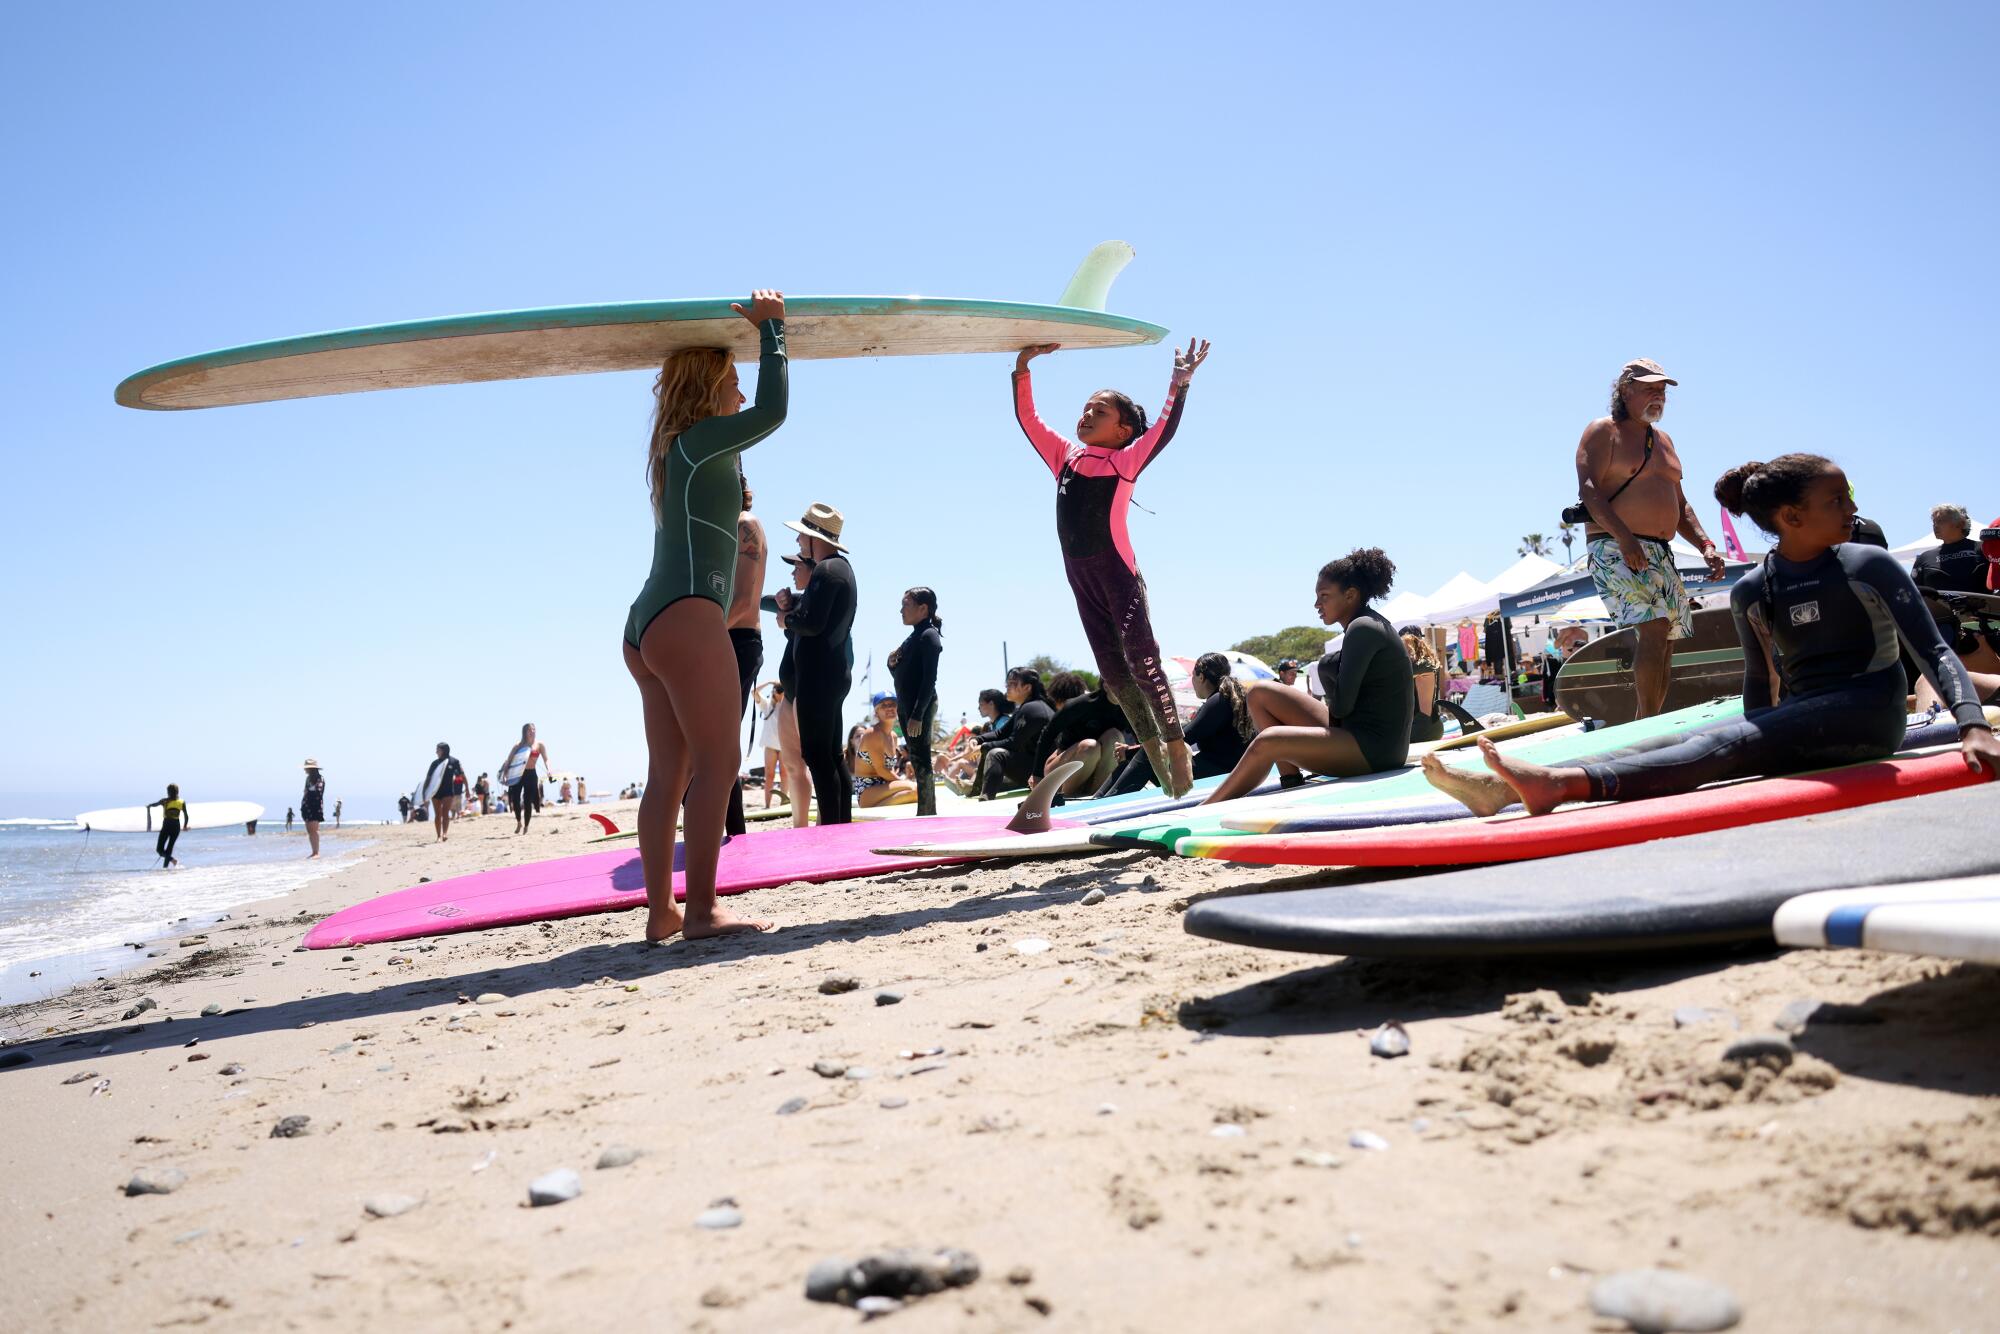 Dahlia Castaneda jumps up to touch a board just before getting in the water for a surf lesson at First Point in Malibu.